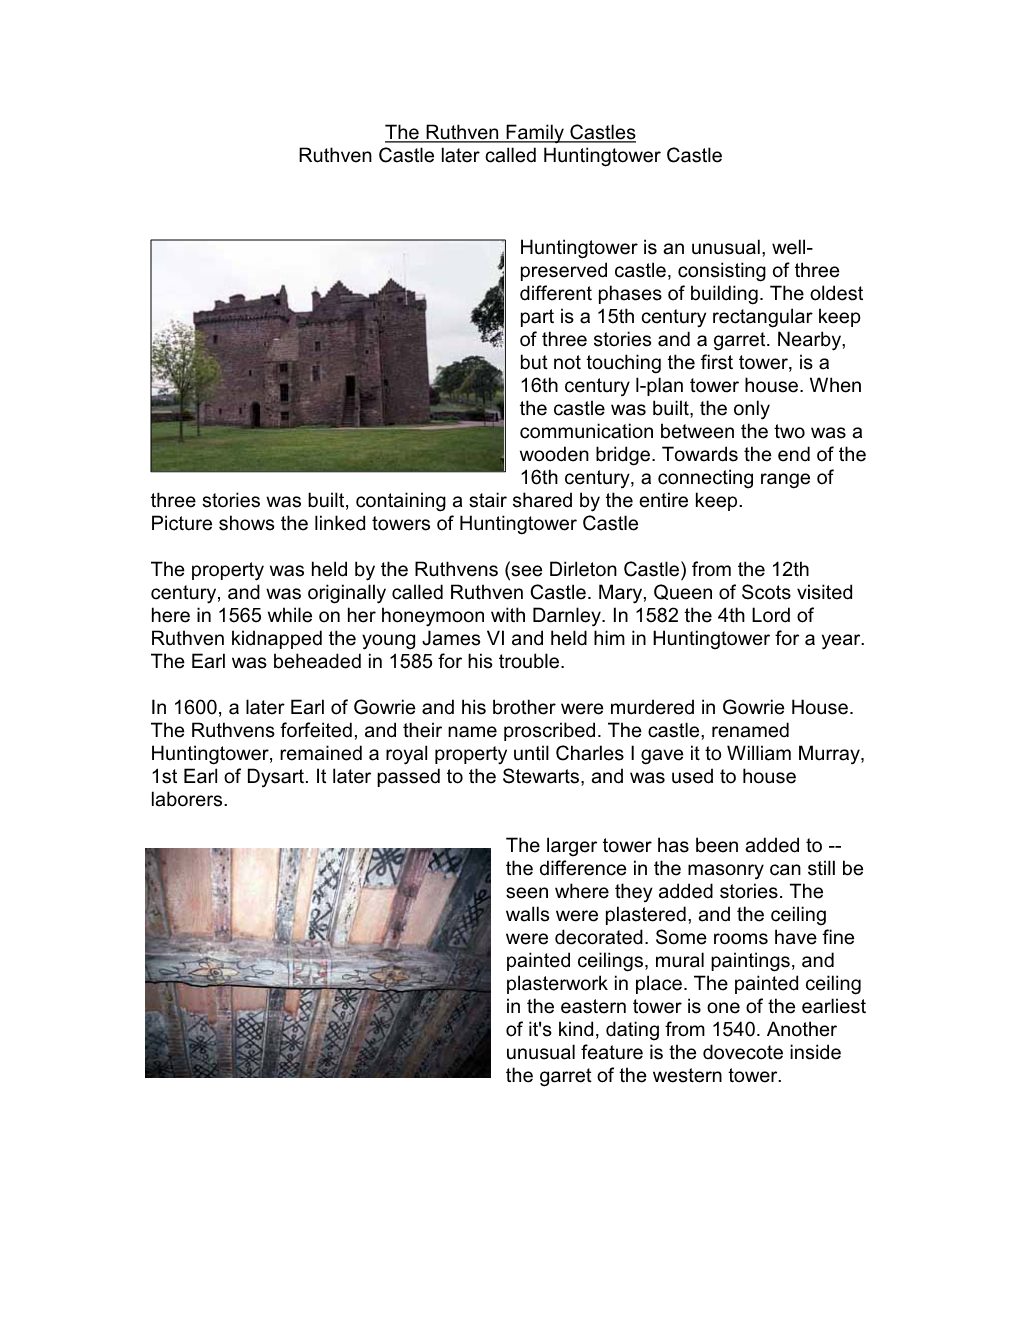 The Ruthven Family Castles Ruthven Castle Later Called Huntingtower Castle